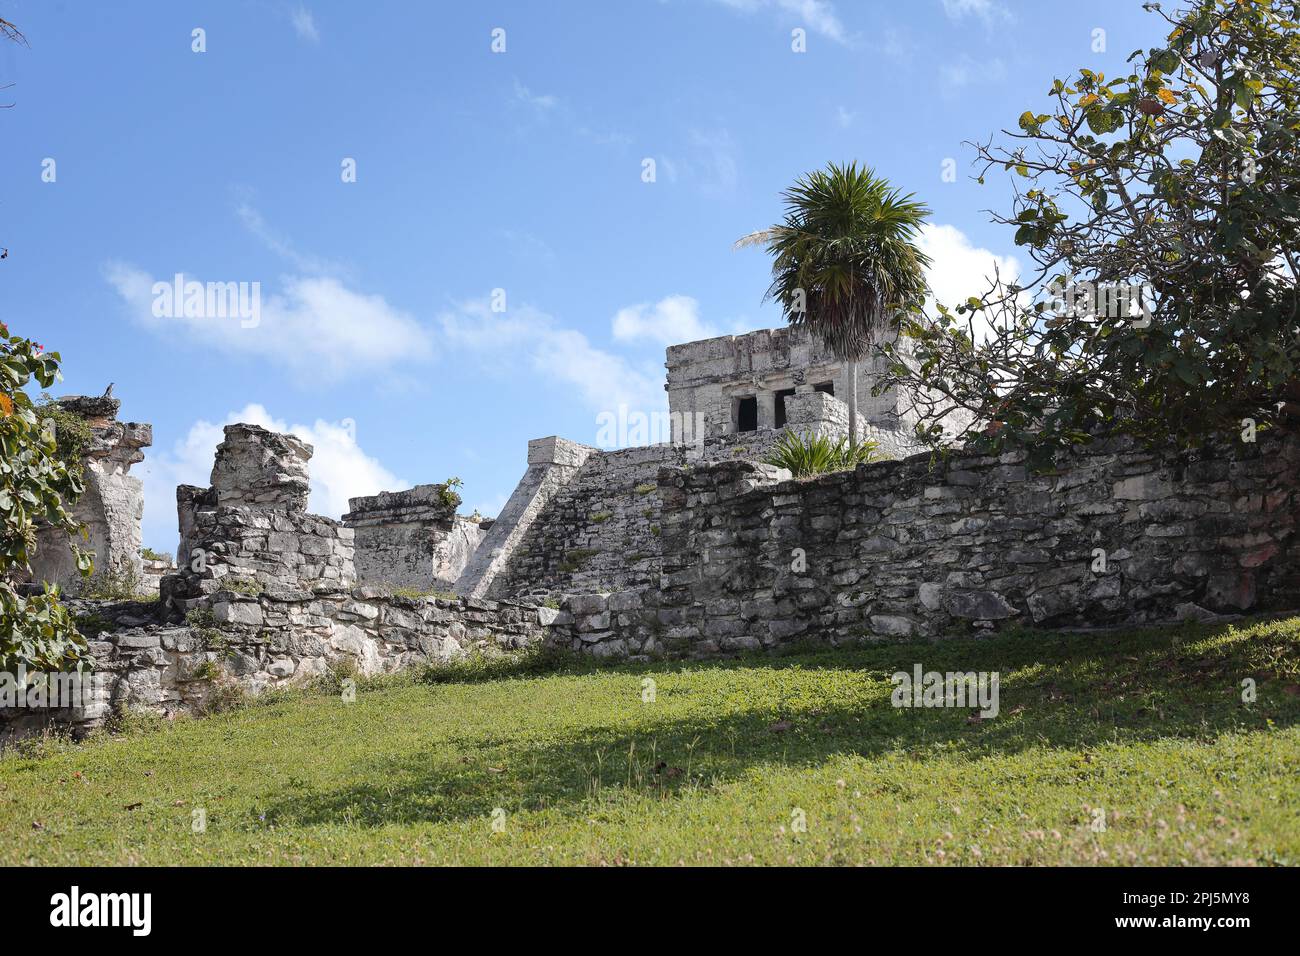 El Castillo (castle) presumed to be a temple but was in fact operating as a lighthouse, Tulum, Mexico Stock Photo